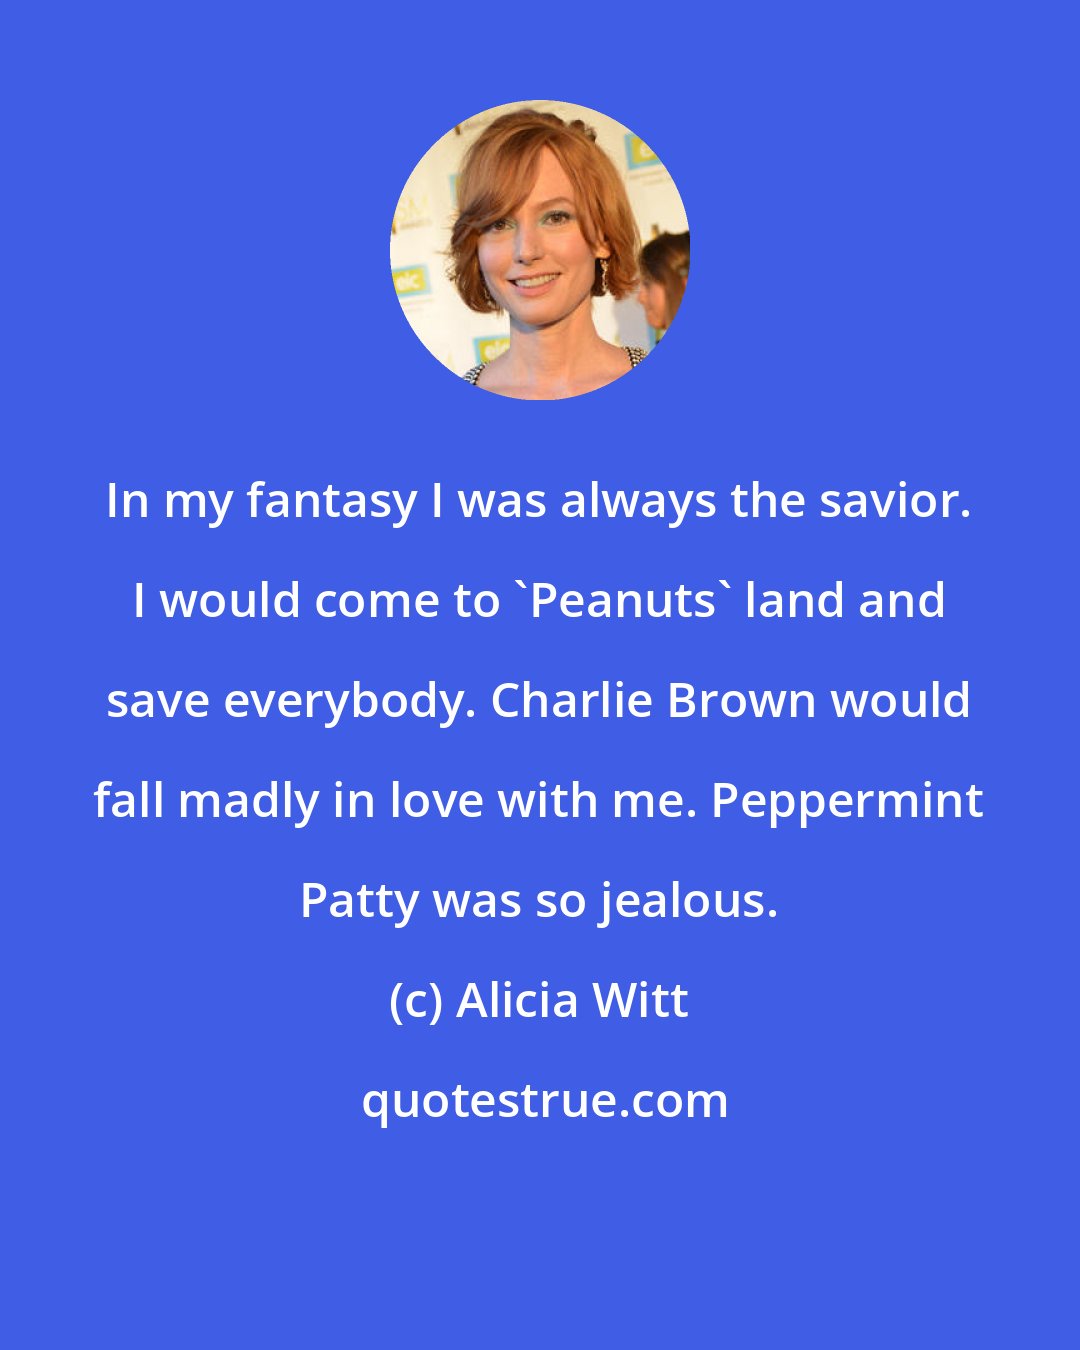 Alicia Witt: In my fantasy I was always the savior. I would come to 'Peanuts' land and save everybody. Charlie Brown would fall madly in love with me. Peppermint Patty was so jealous.